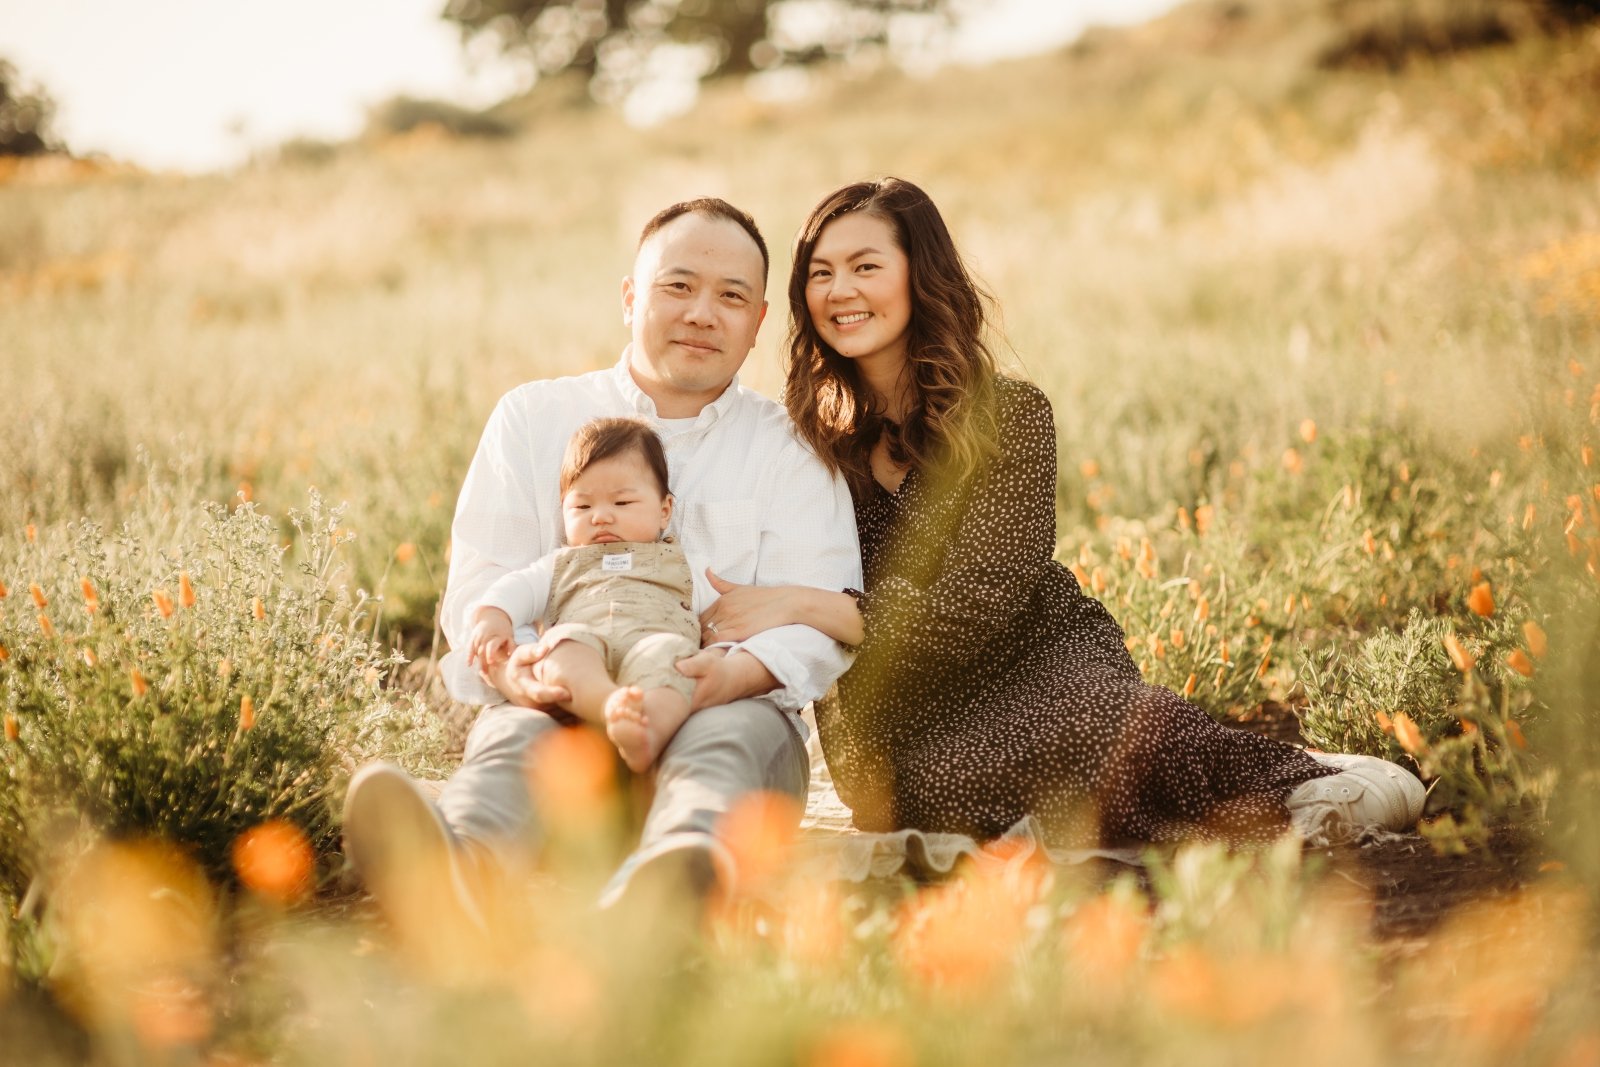 EAST BAY AREA FAMILY PHOTOGRAPHY SHELL RIDGE OPEN SPACE BABY LIFESTYLE PHOTOSHOOT  23.jpg